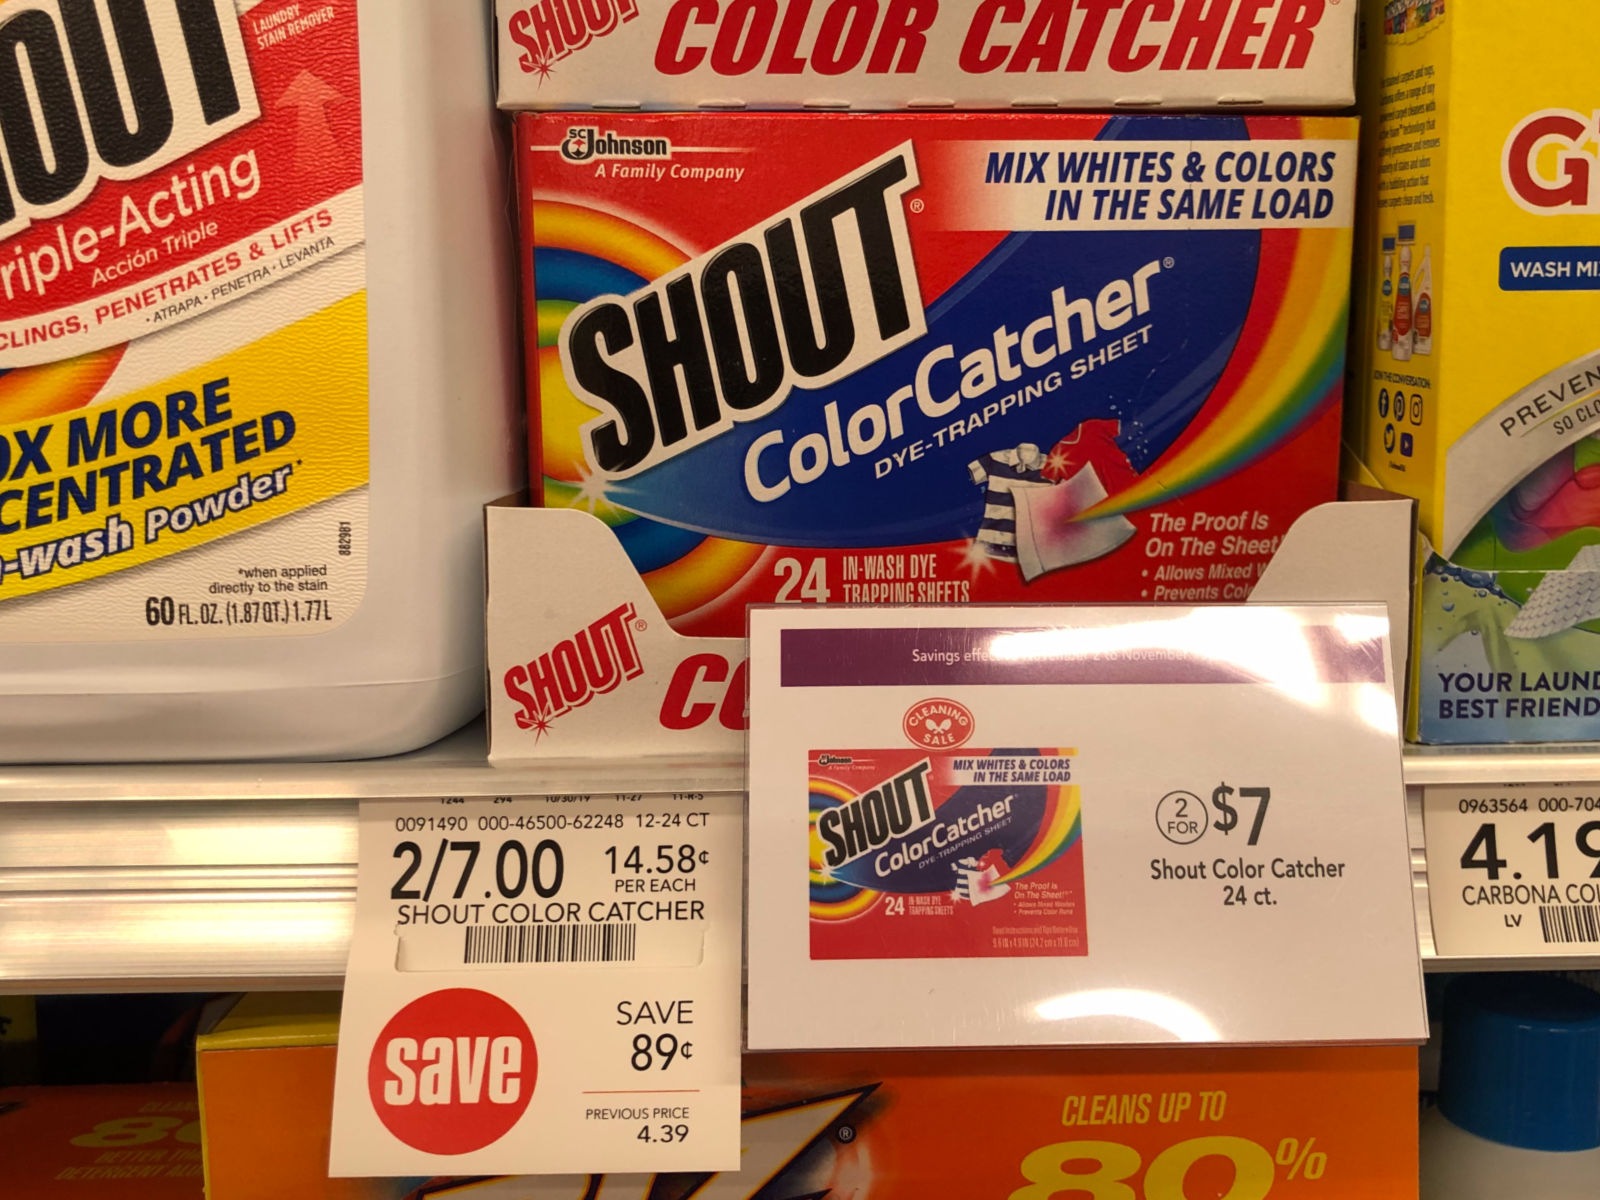 Shout Color Catcher Dye-Trapping Cloths